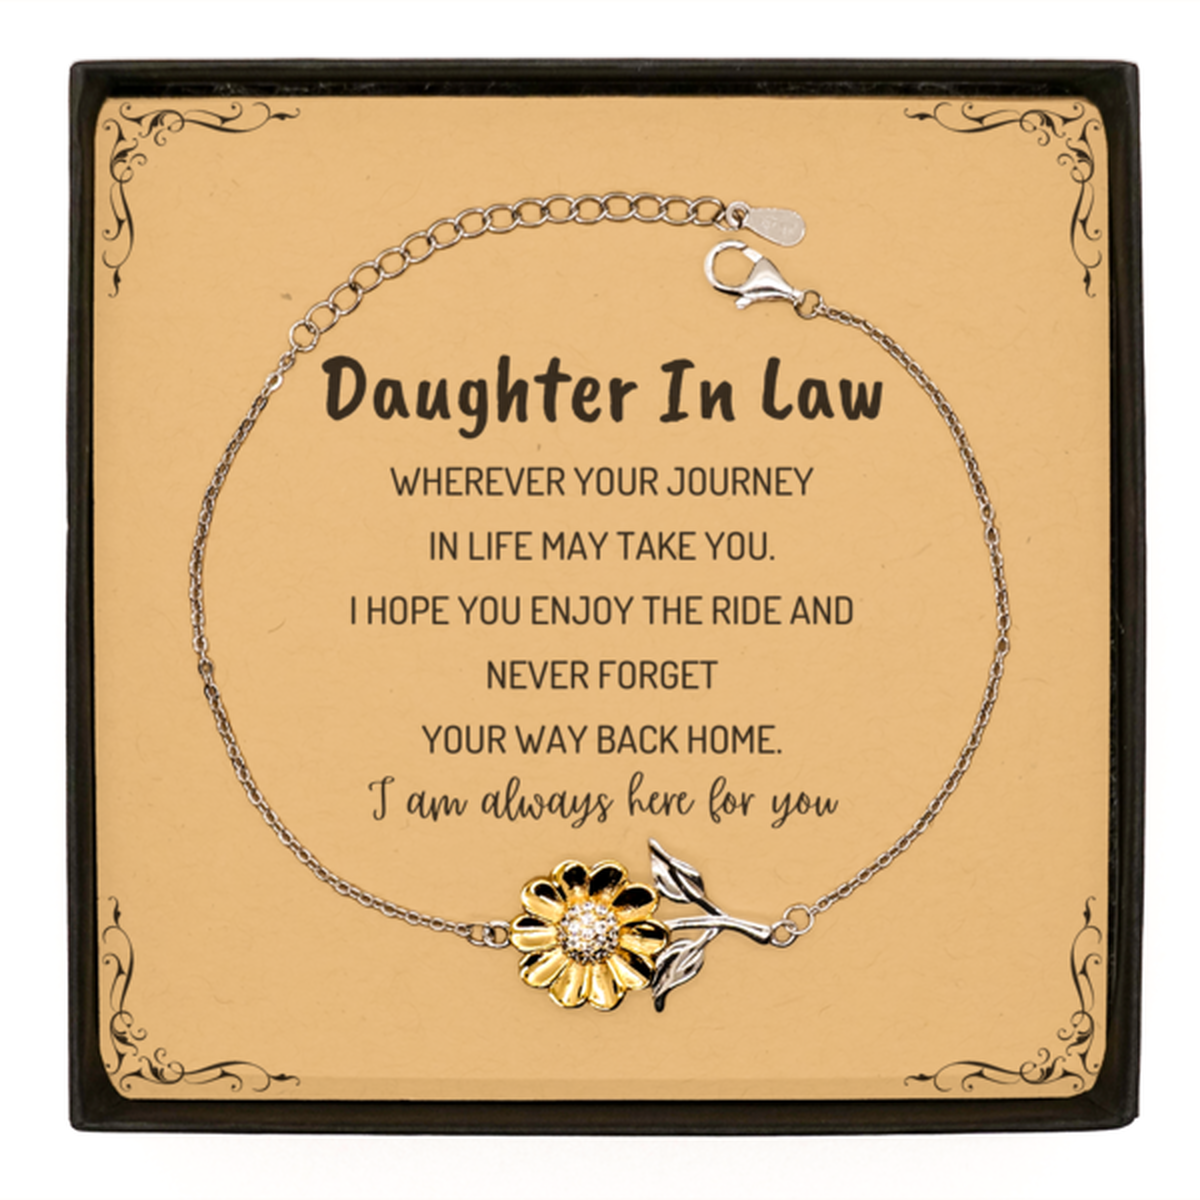 Daughter In Law wherever your journey in life may take you, I am always here for you Daughter In Law Sunflower Bracelet, Awesome Christmas Gifts For Daughter In Law Message Card, Daughter In Law Birthday Gifts for Men Women Family Loved One